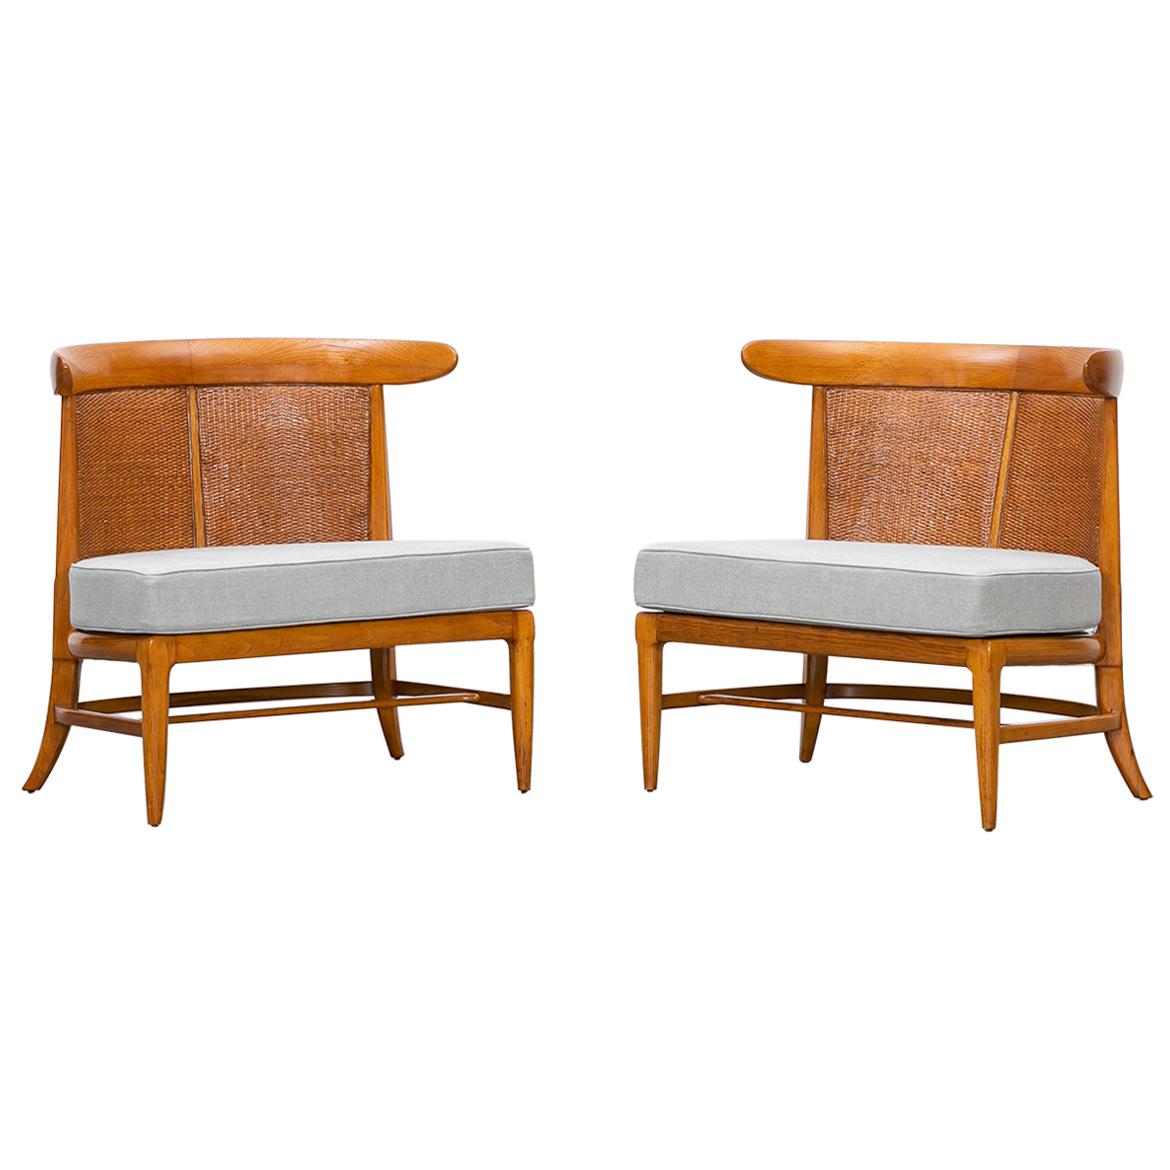 1950s Brown Walnut and Cane Lounge Chairs by Lubberts and Mulder 'i'